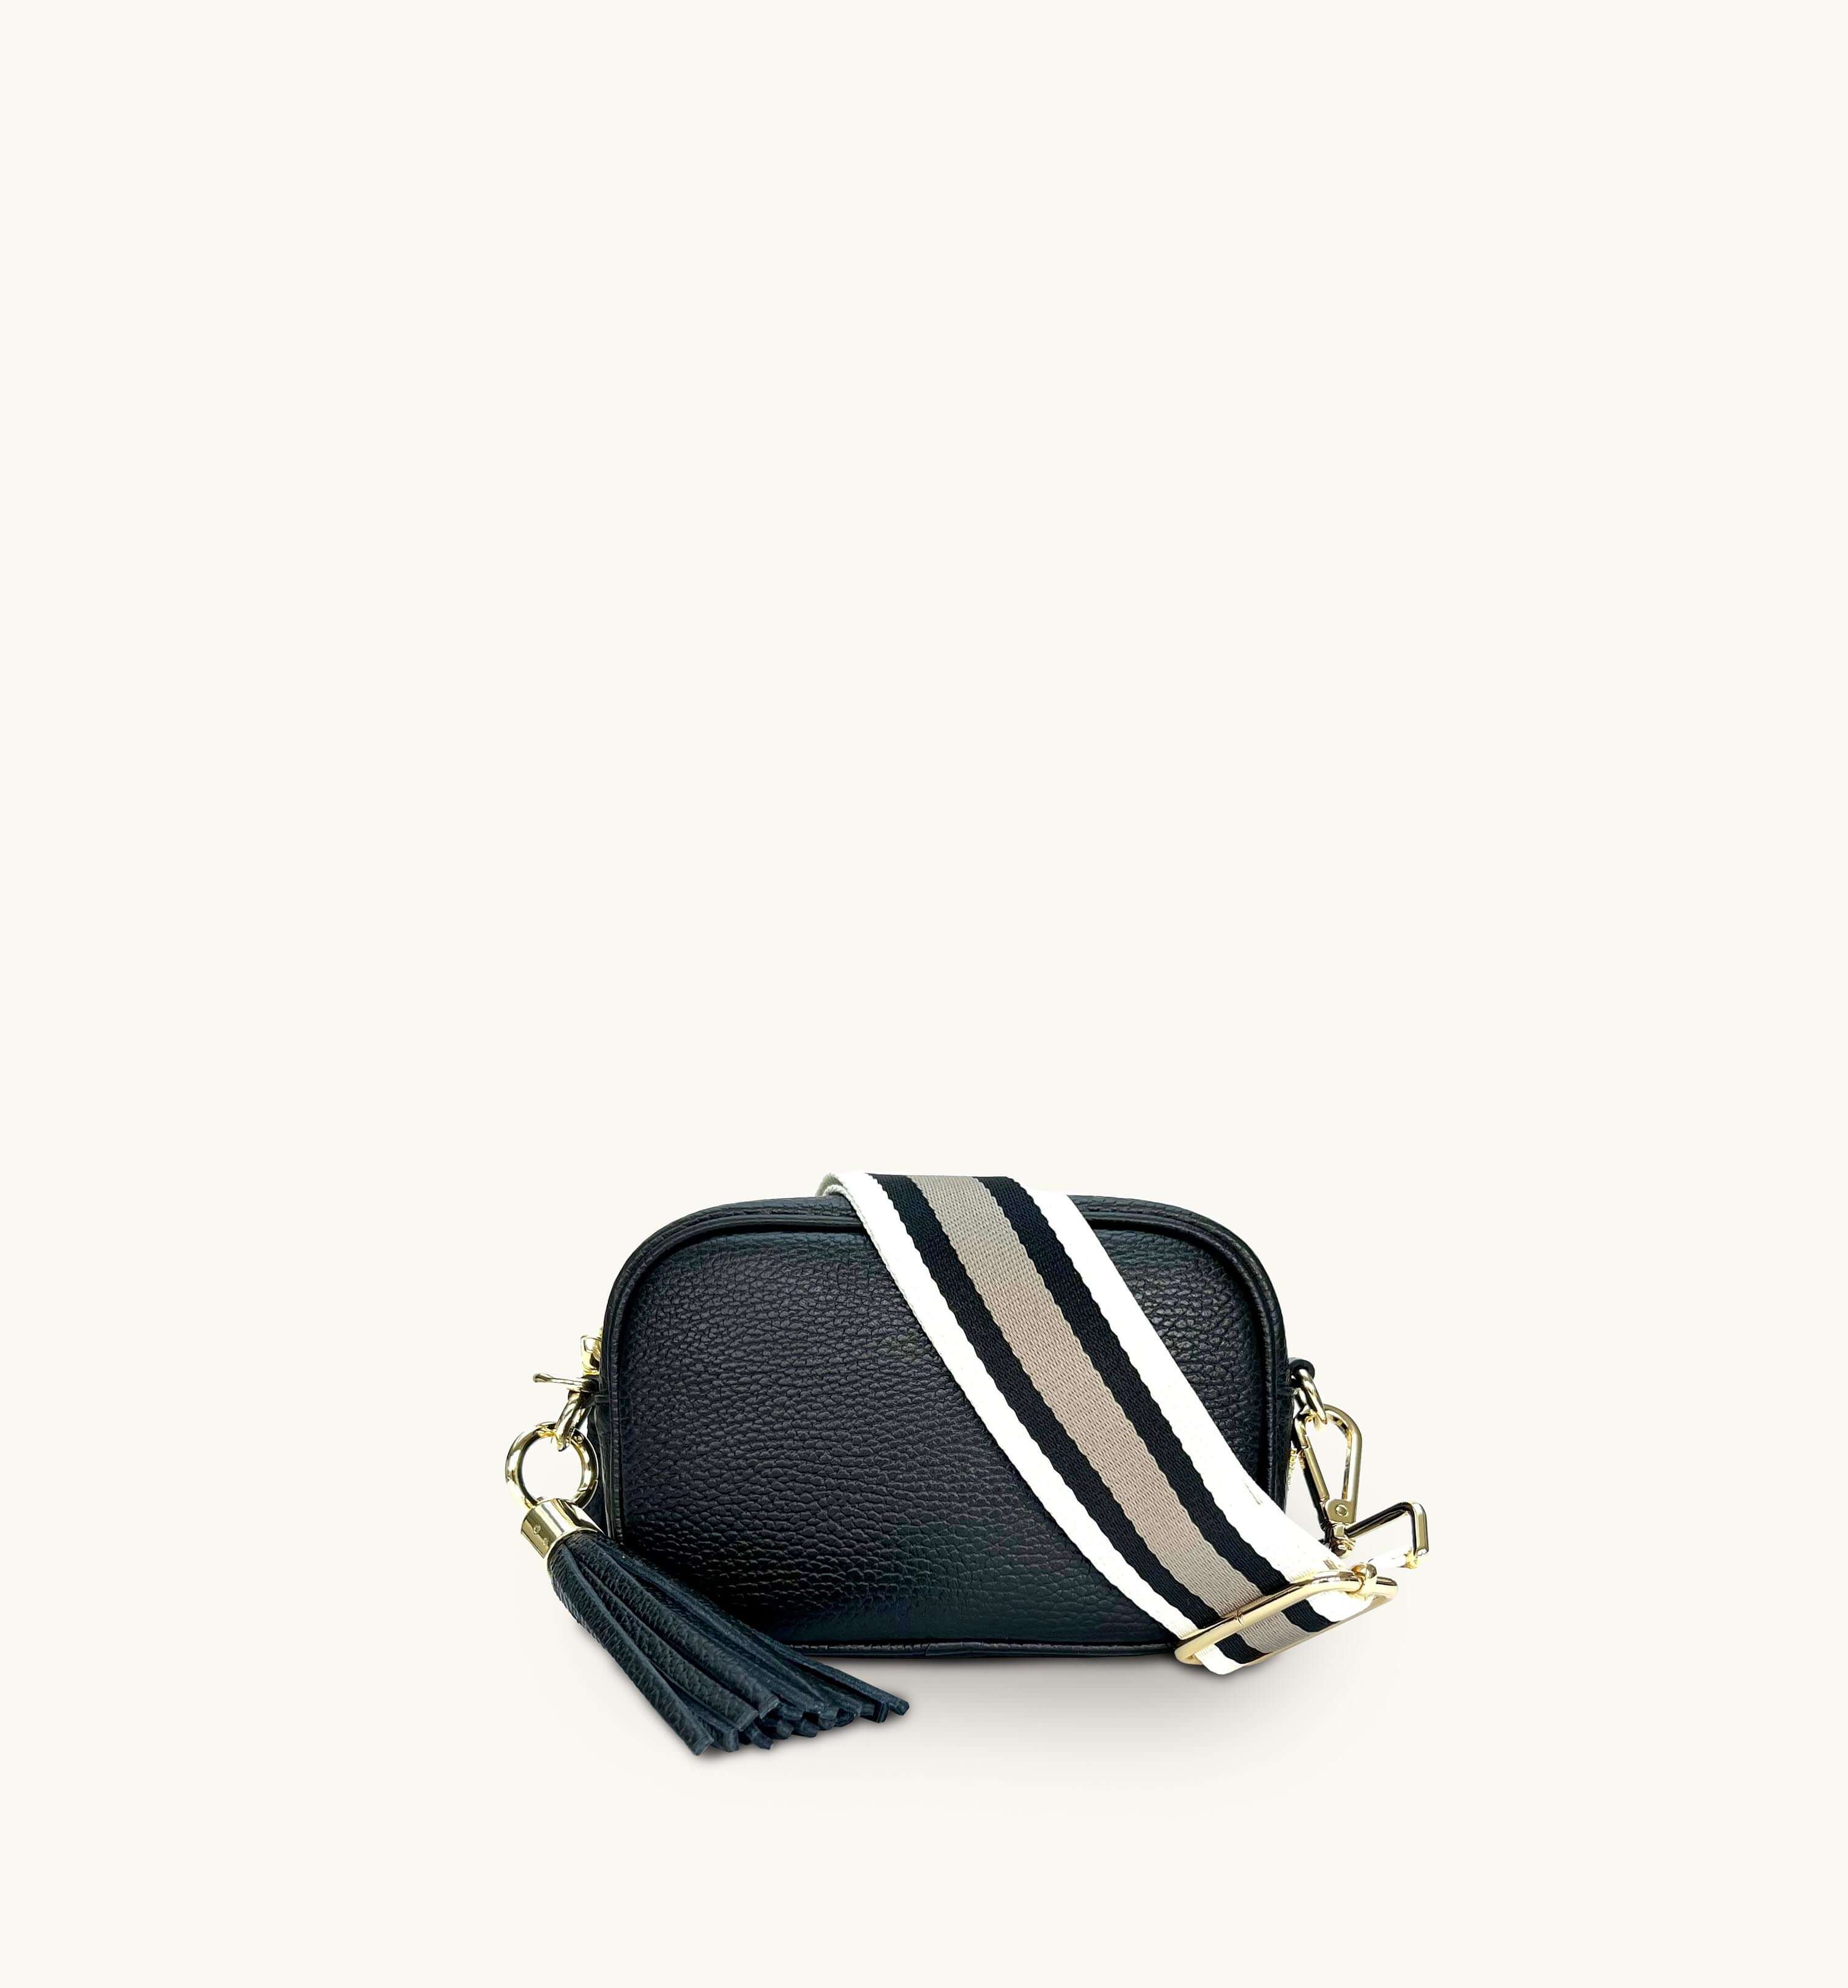 Apatchy Mini Black Leather Phone Bag With Latte Stripe Strap